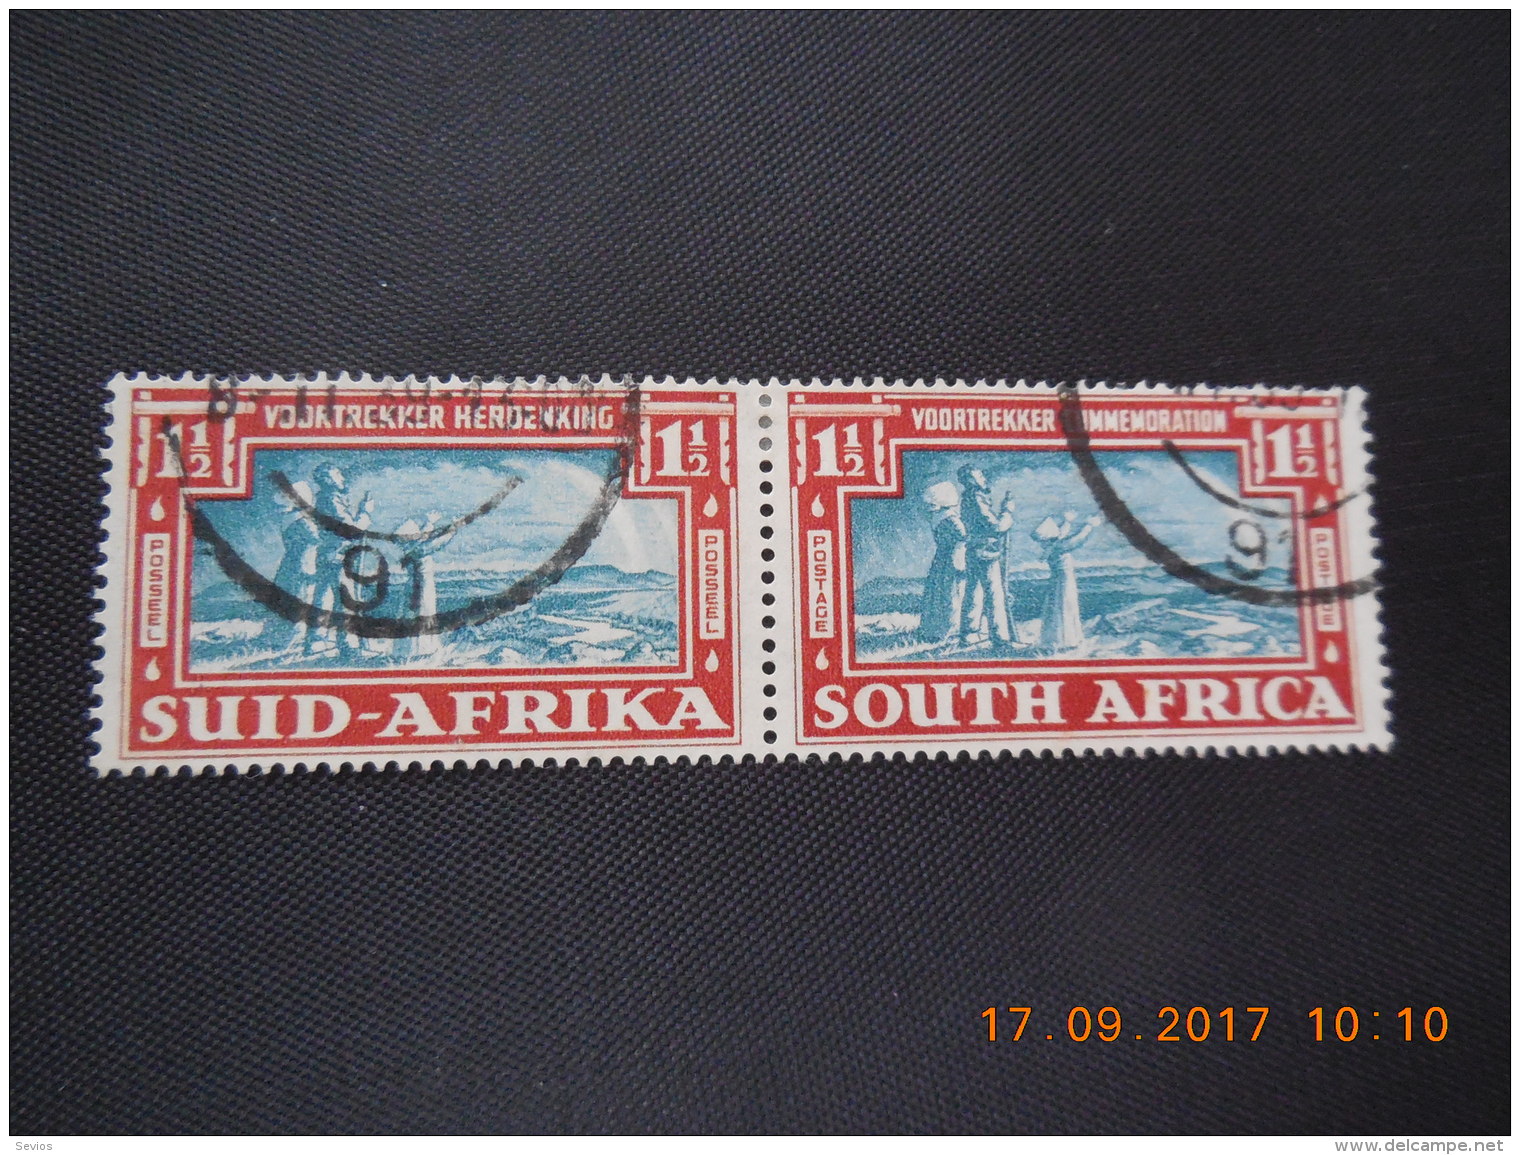 South Africa / Stamps / Sevios / Used - Unclassified